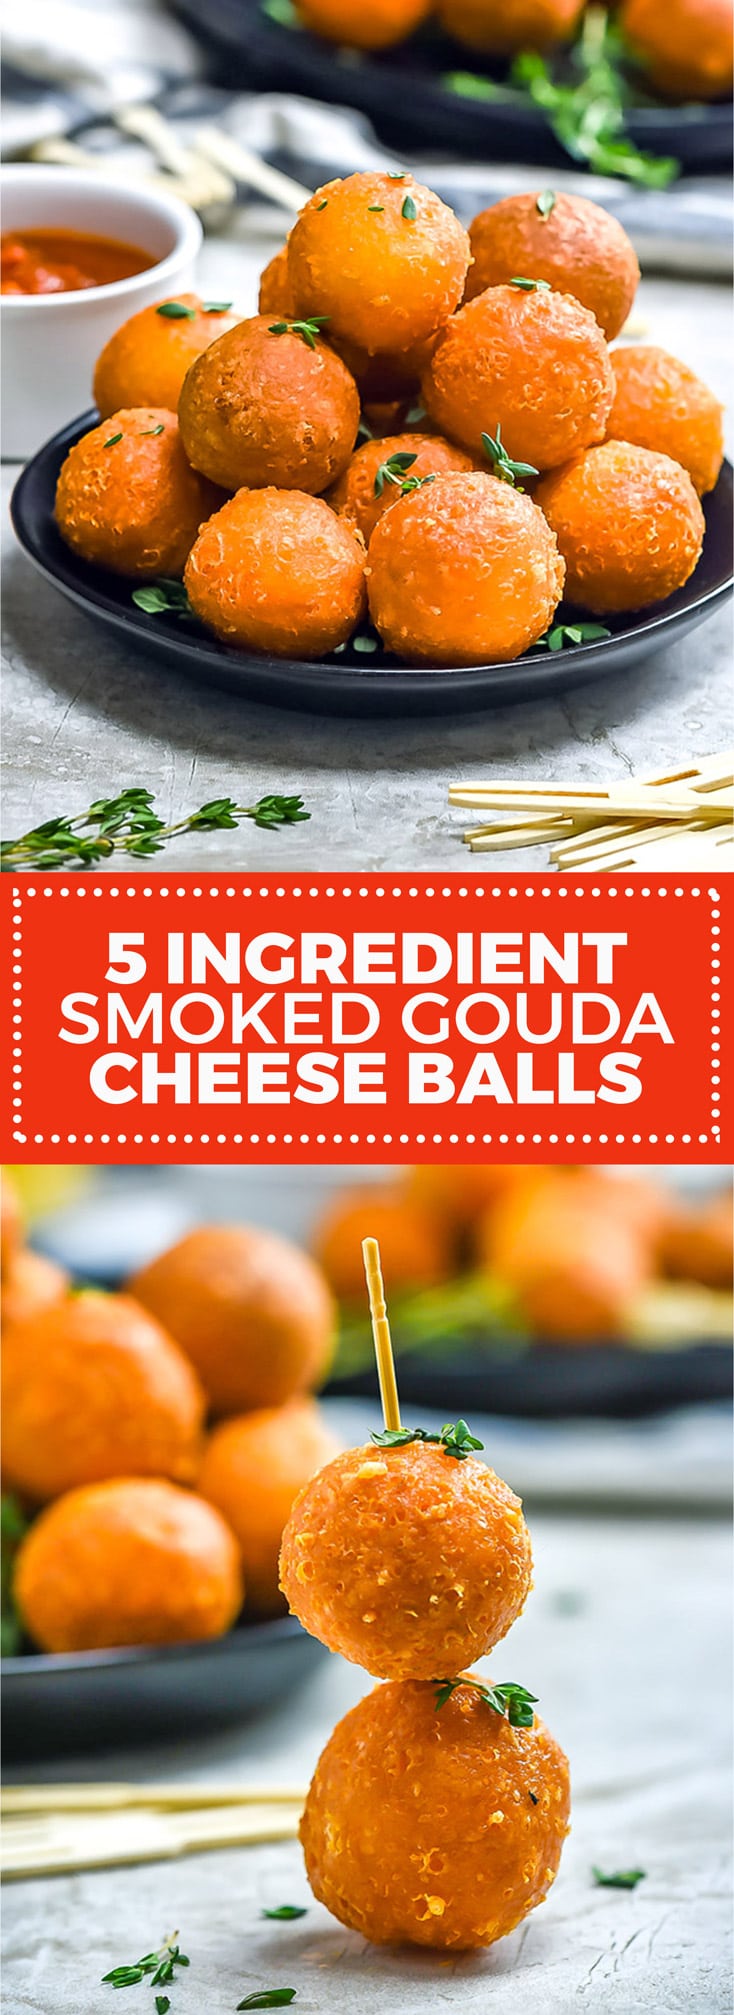 5 Ingredient Crispy Smoked Gouda Cheese Balls. At parties, cheesy appetizers are always a hit. These cheese balls, with their crisp outside, airy inside, and smoky flavor are no exception. They take only 30 minutes to put together, and they're absolutely addictive. | hostthetoast.com